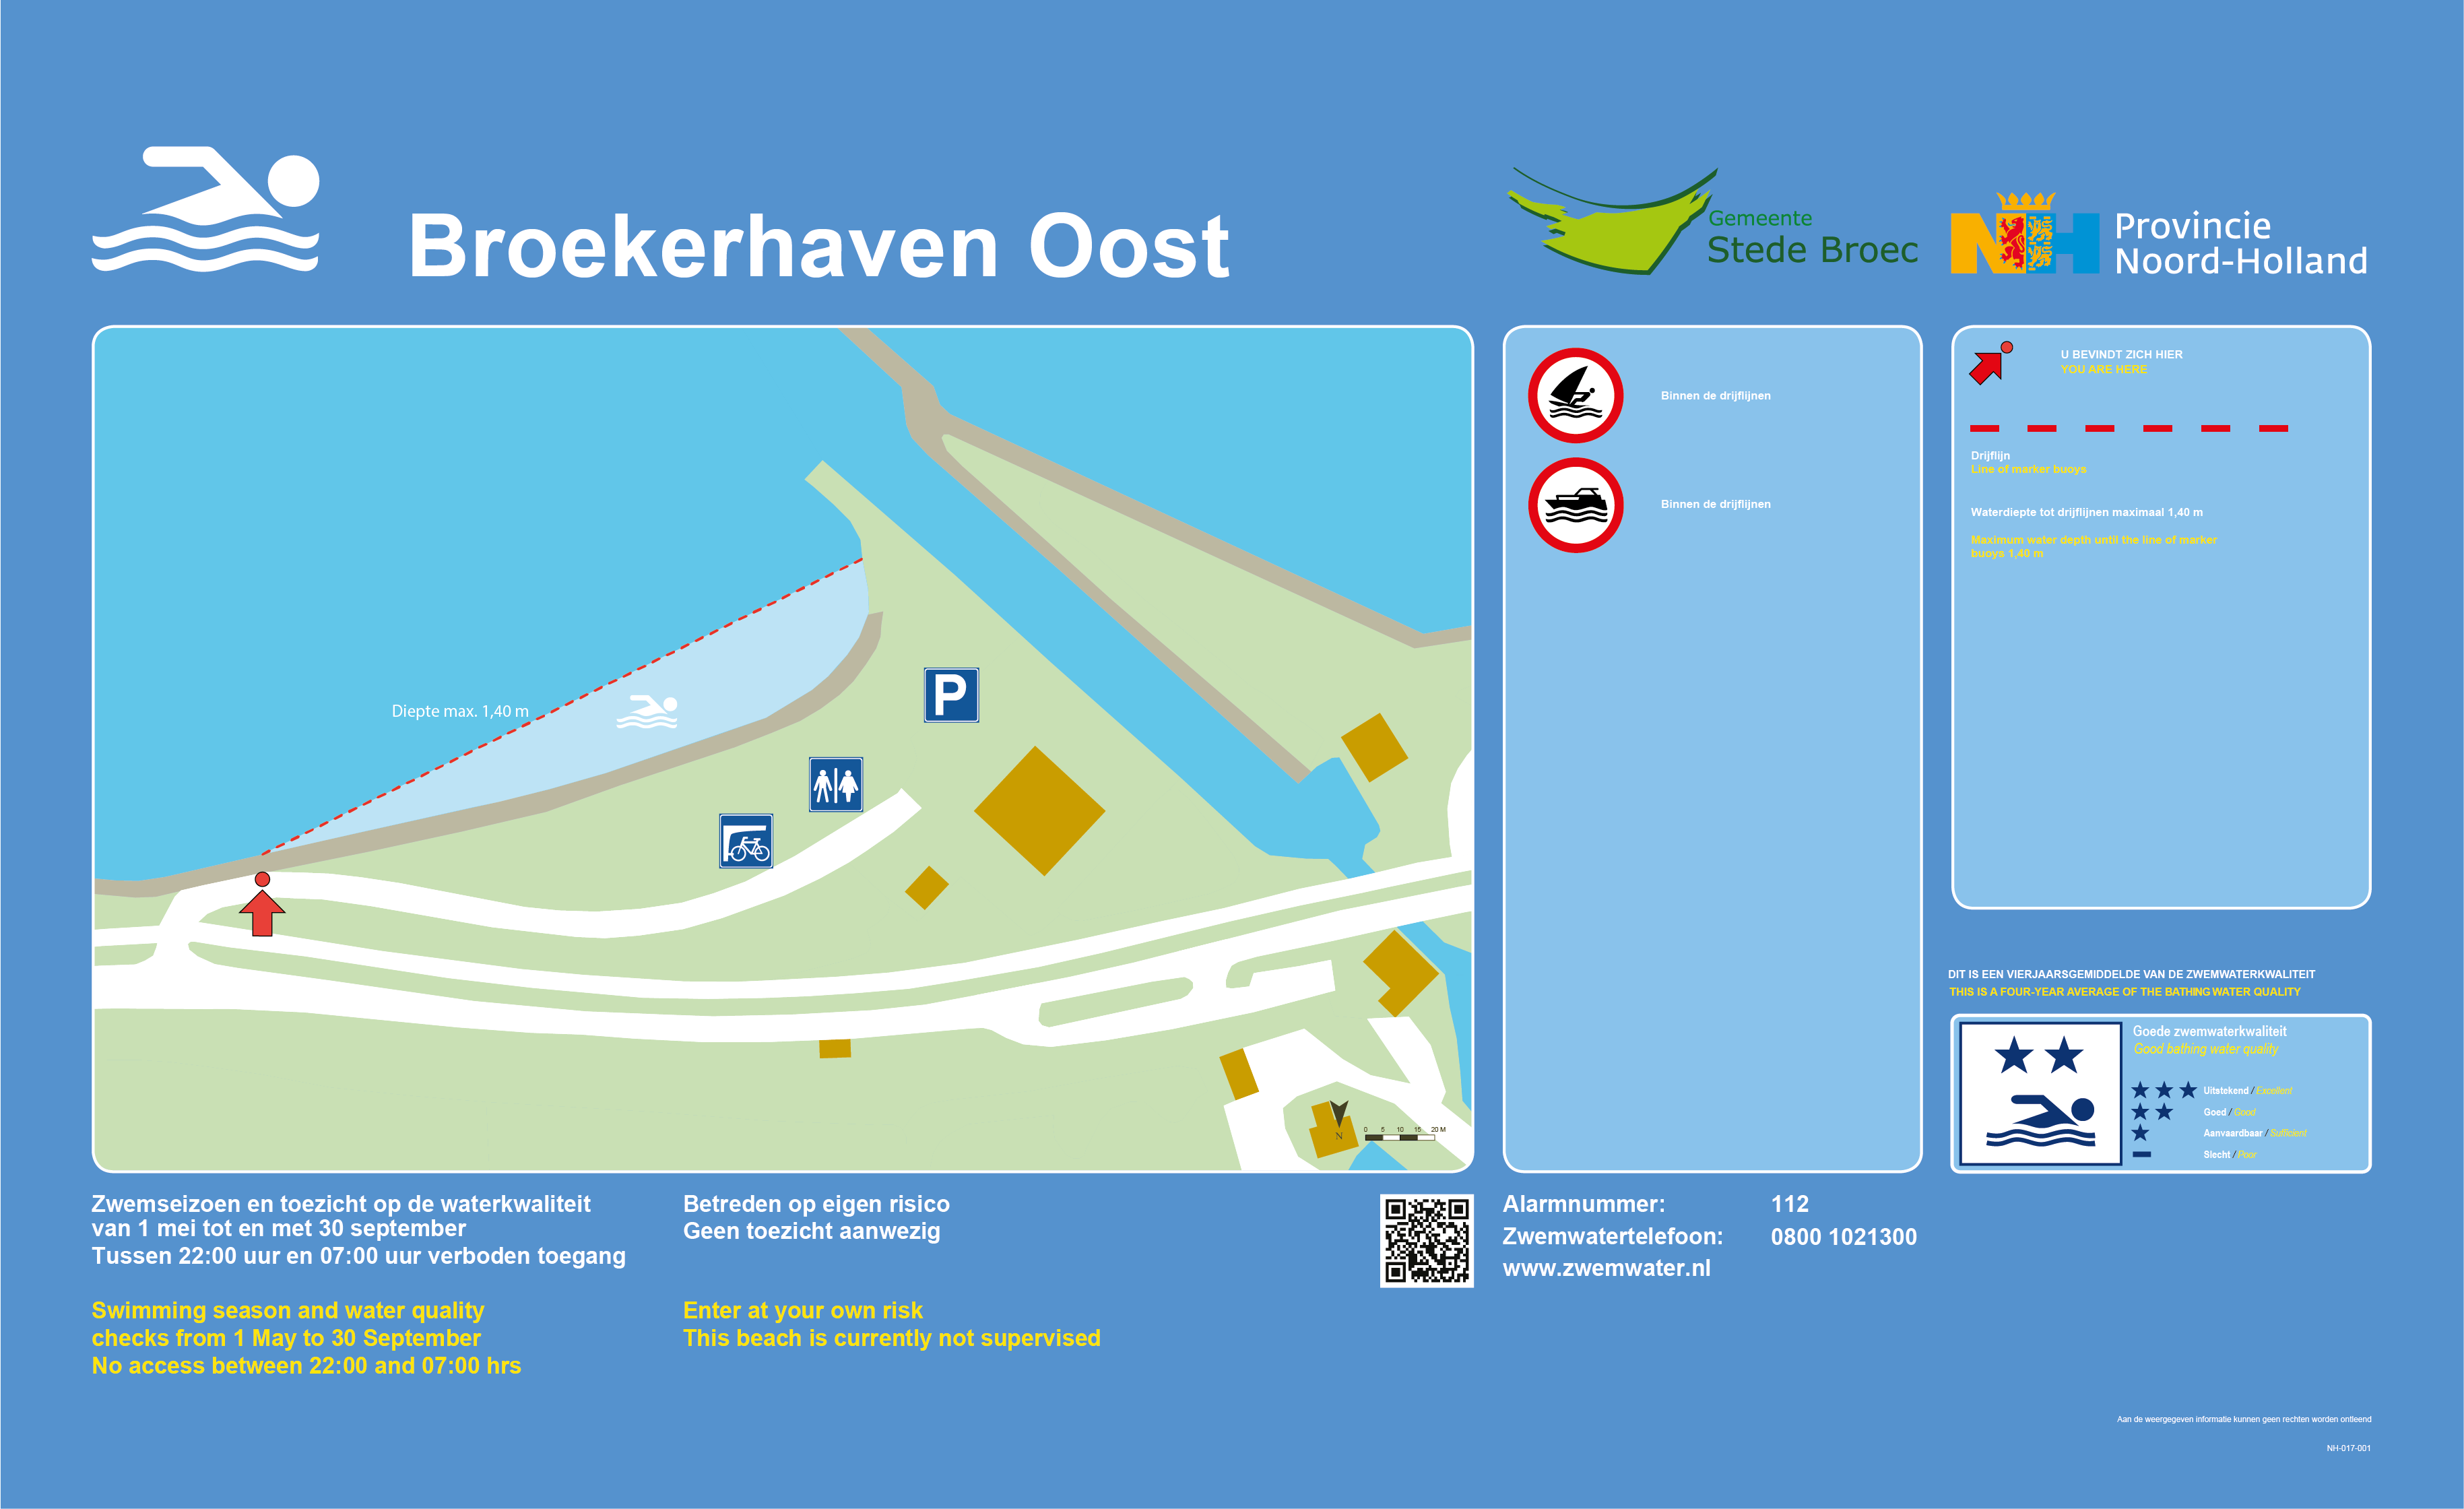 The information board at the swimming location Broekerhaven Oost